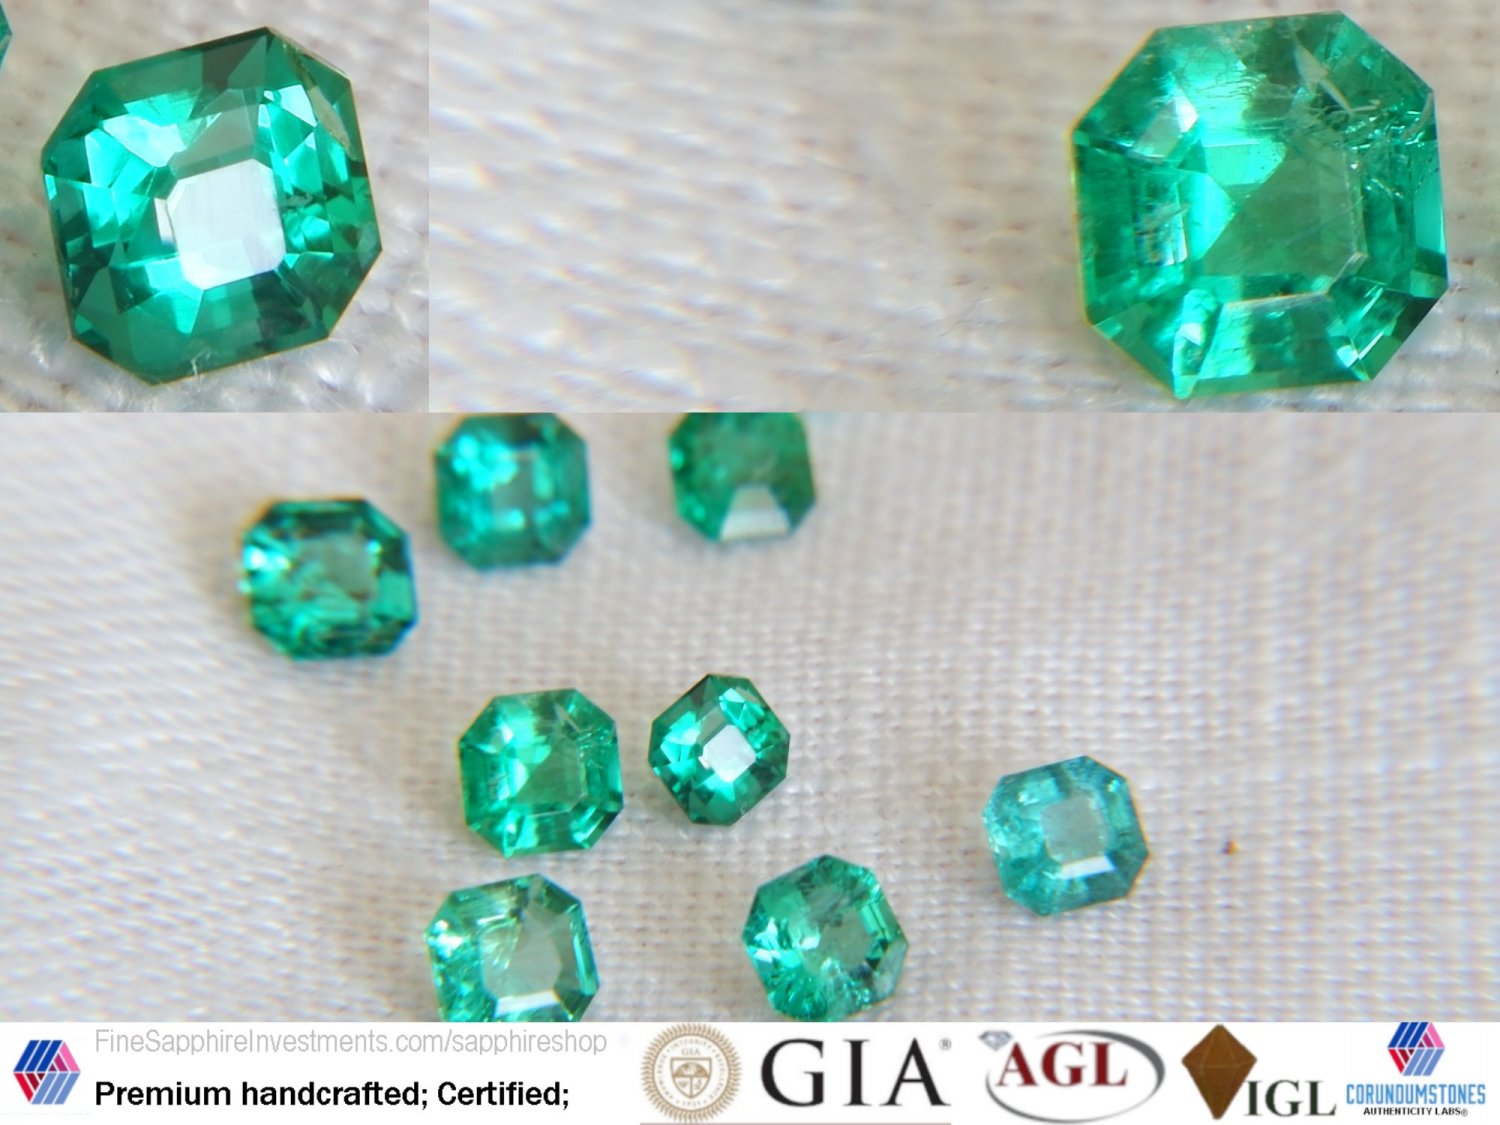  Emerald Lot, grass-green, premium cut Various premium handcrafted step cuts with different pavilion